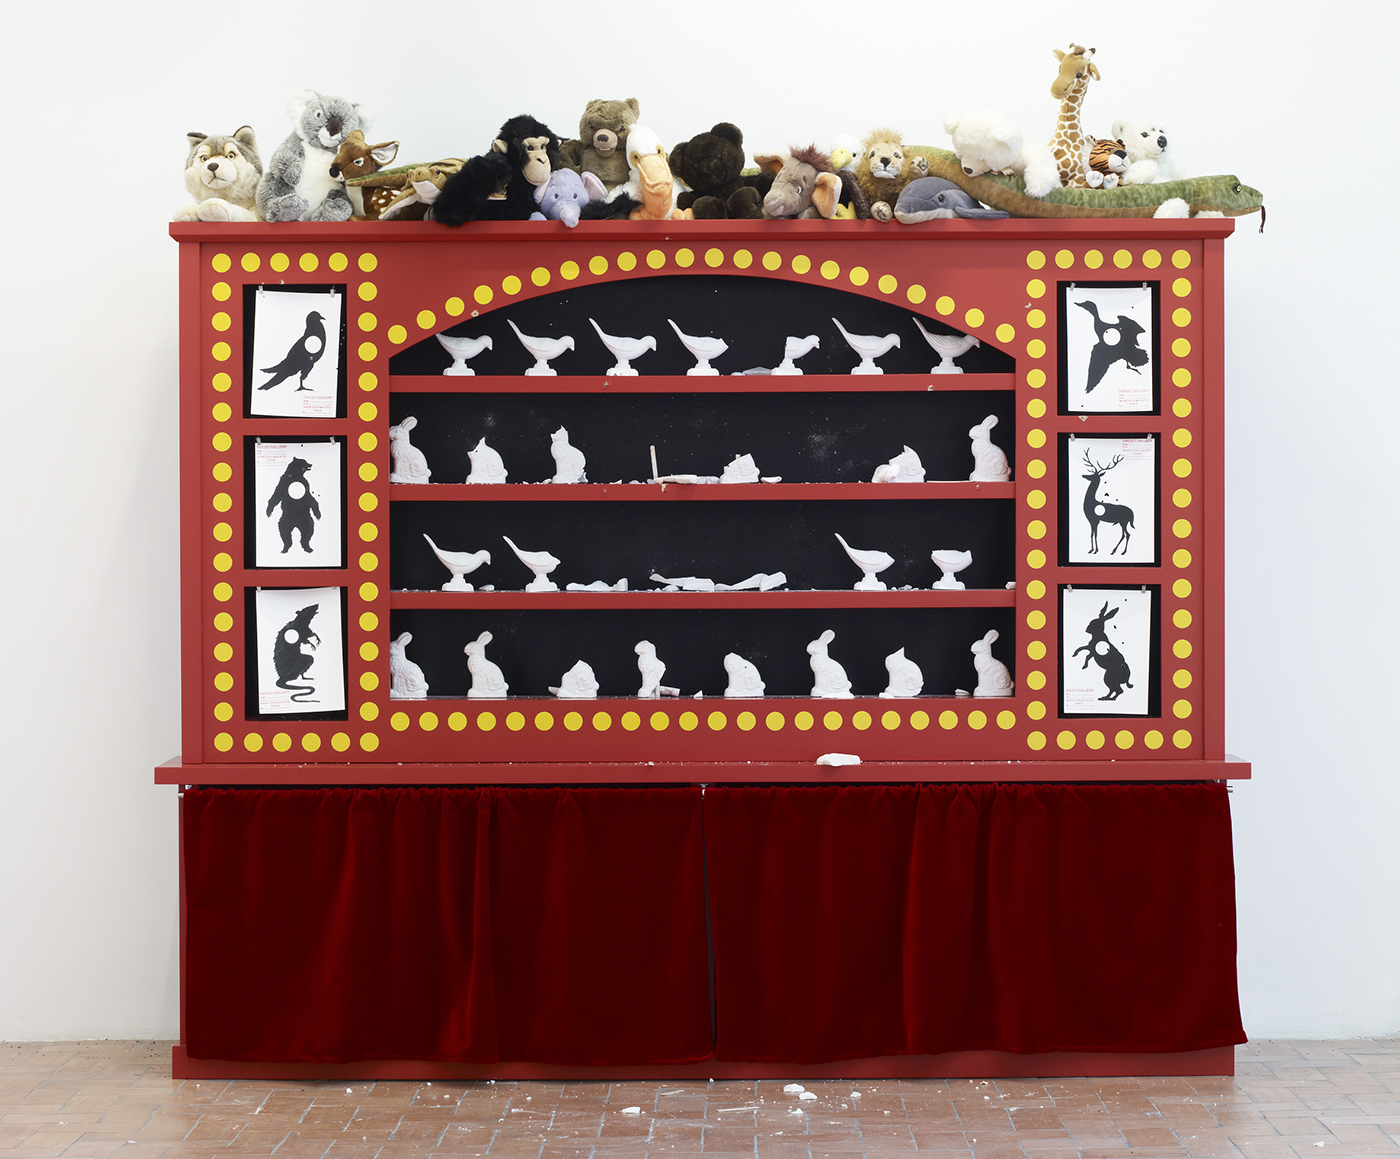 The Shooting Gallery, 2010